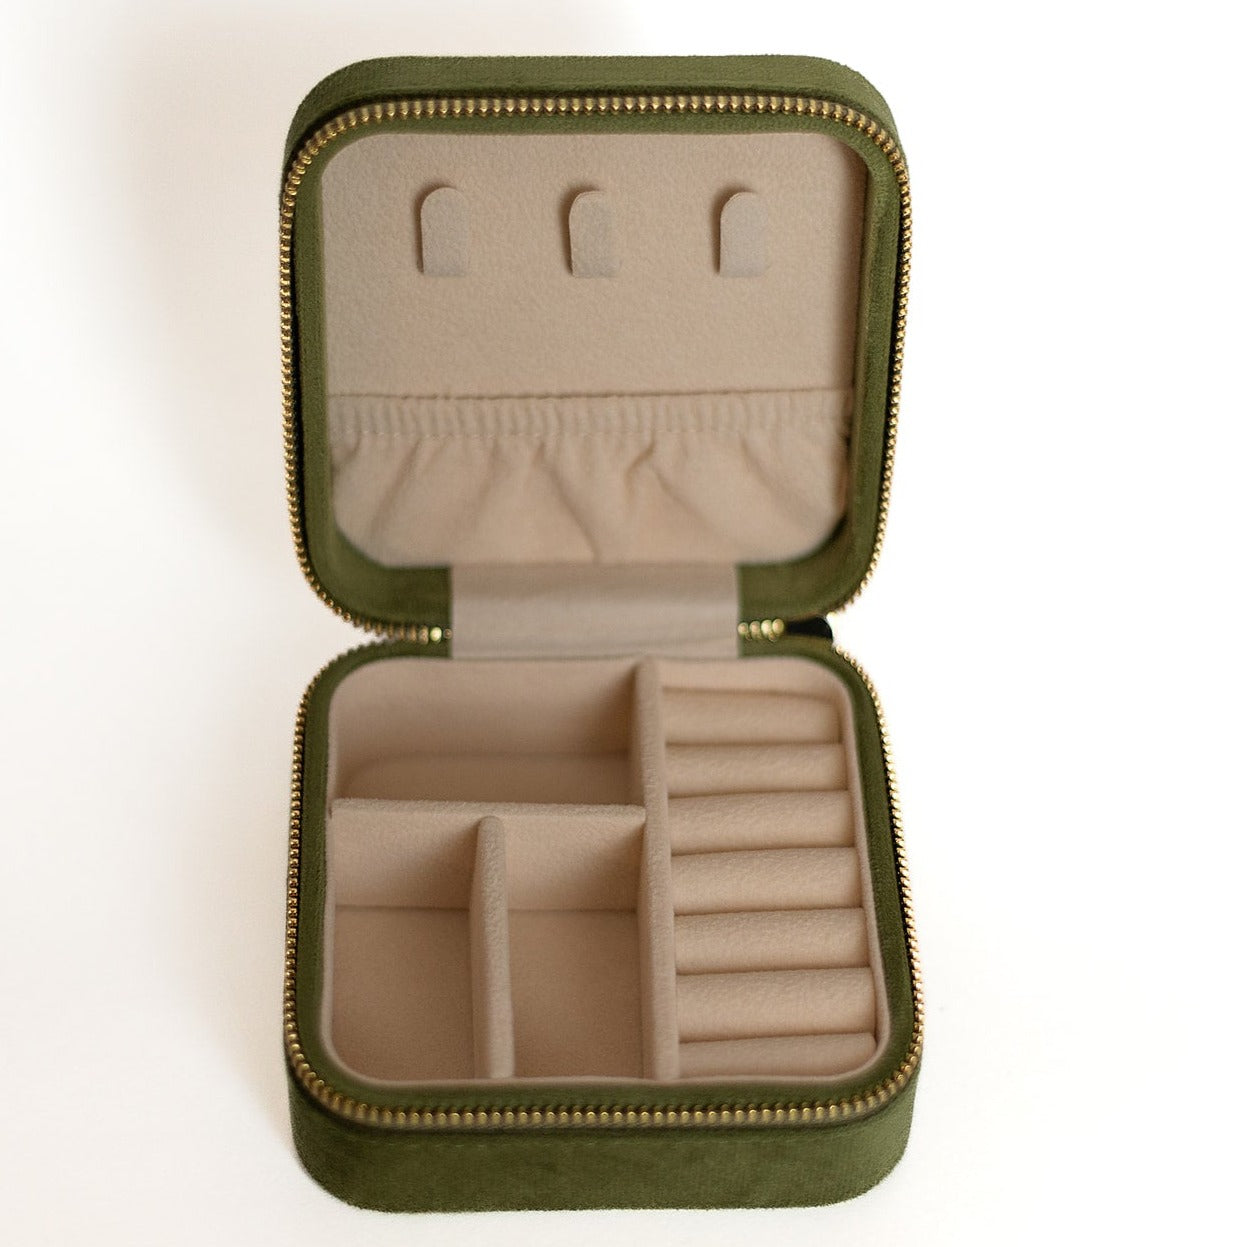 The inside of an olive-coloured jewelry case. There are three storage sections and seven ring slots on the bottom portion of the case. On the top half, there are three hooks for chains or necklaces and well as a pouch to tuck them in.